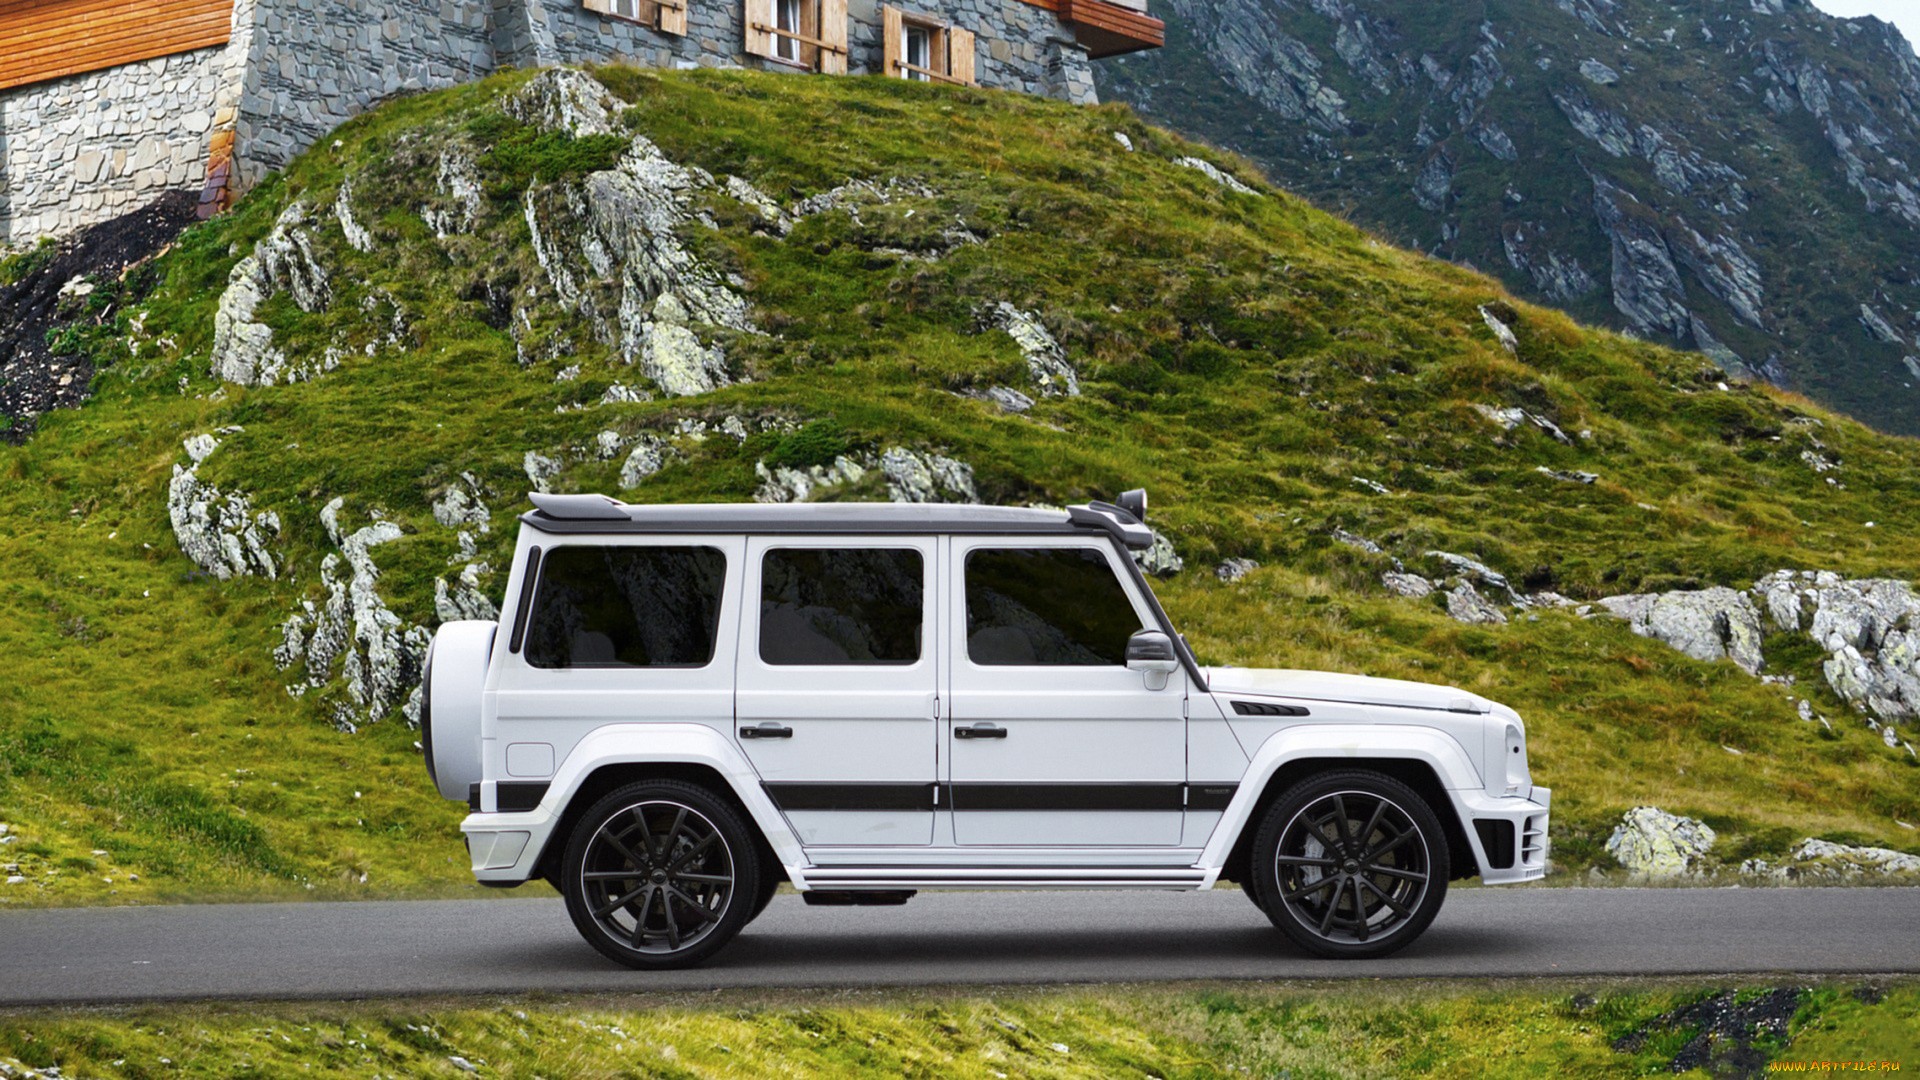 mansory, gronos, facelift, based, on, mercedes-benz, amg, g63, 2016, автомобили, mercedes-benz, 2016, g63, amg, based, facelift, gronos, mansory